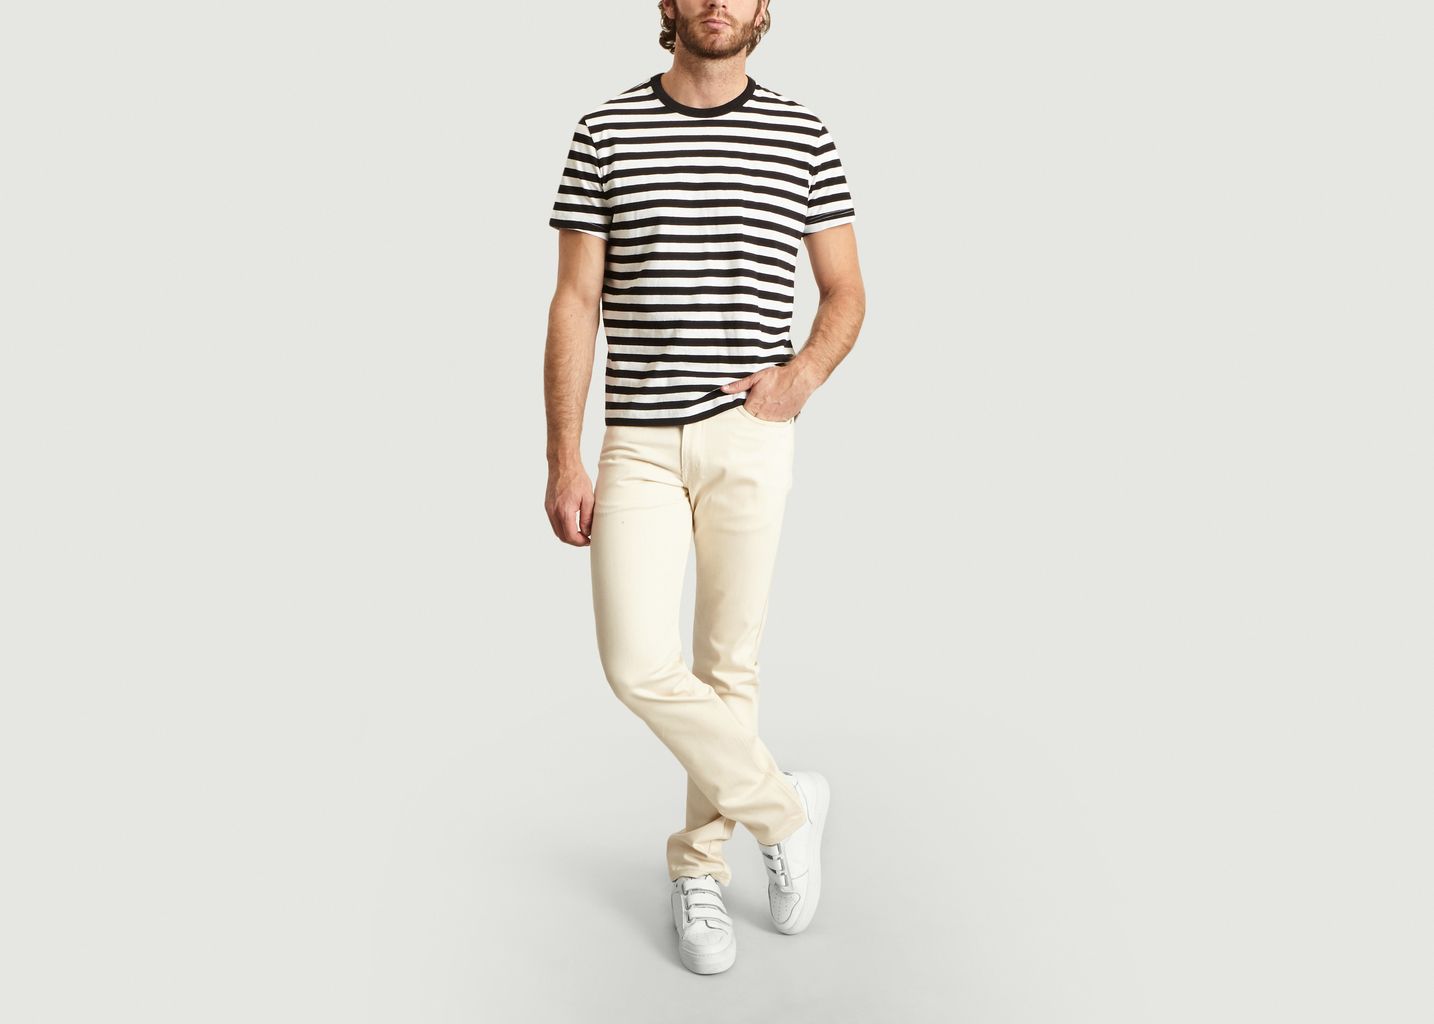 Weirdguy Natural Seed Jeans - Naked and Famous